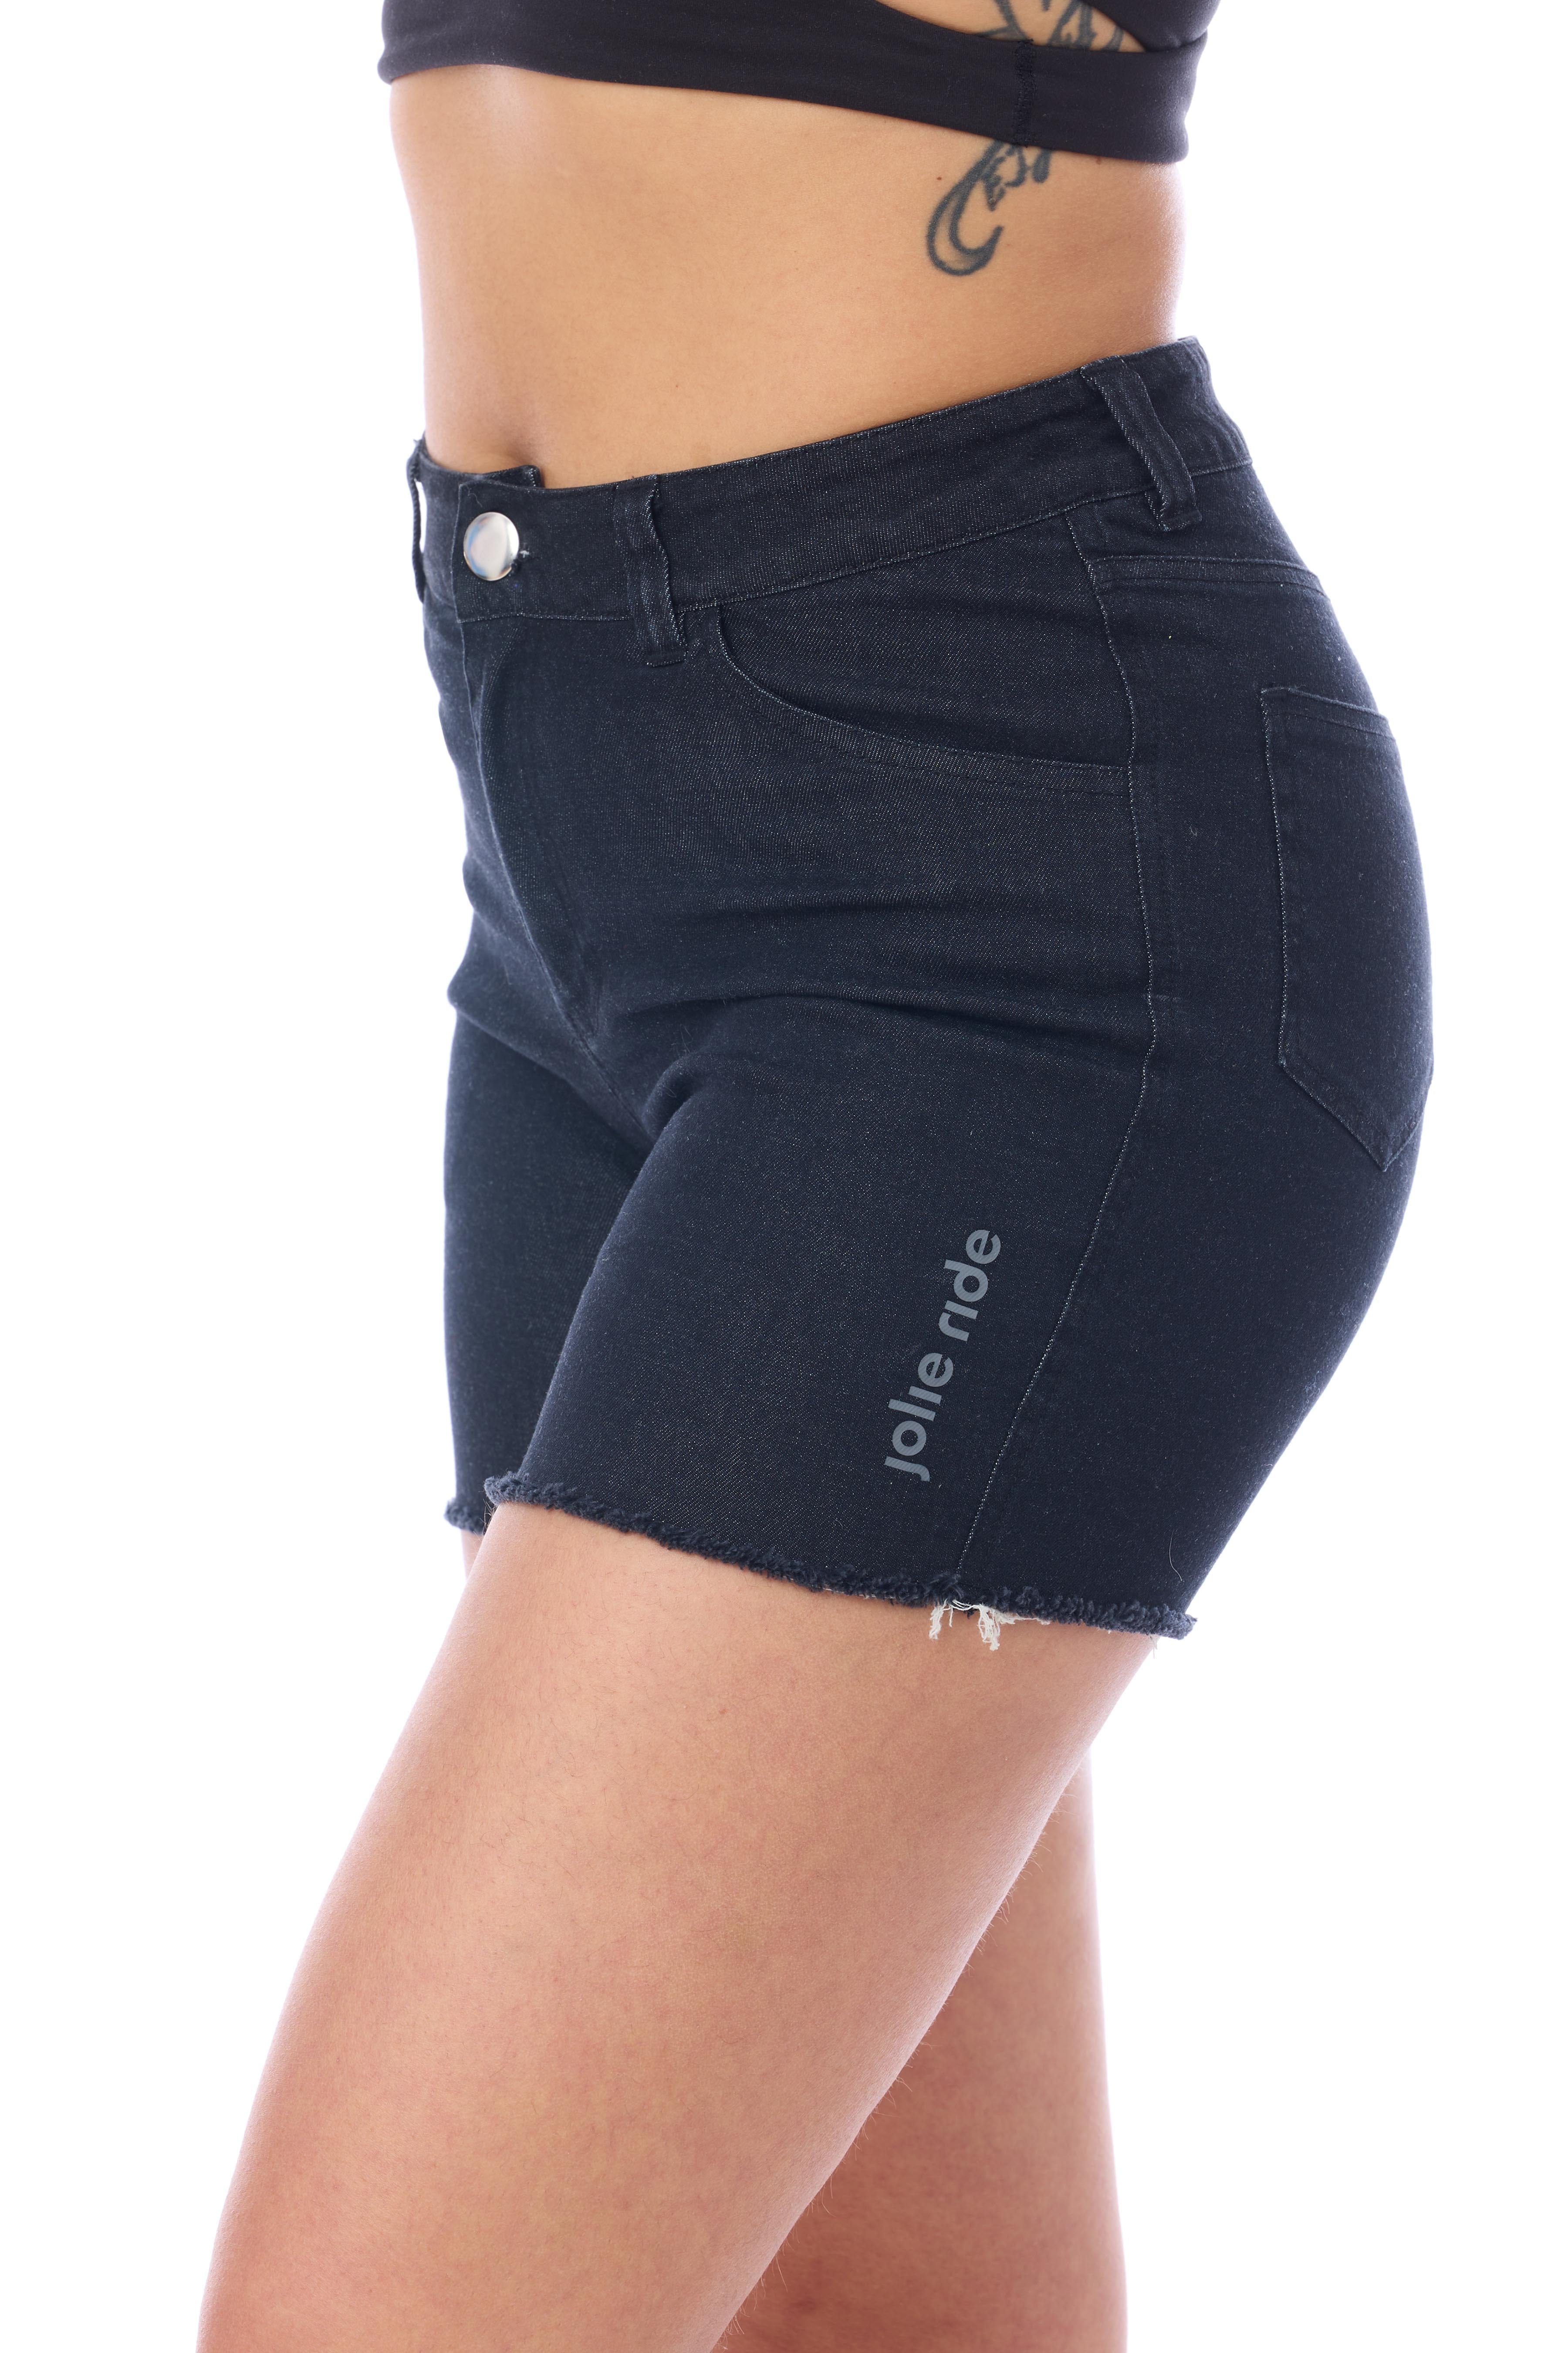 JolieRide Shorts Black Denim / XS mtb denim shorts with exceptionaly stretch fabric and gel pad